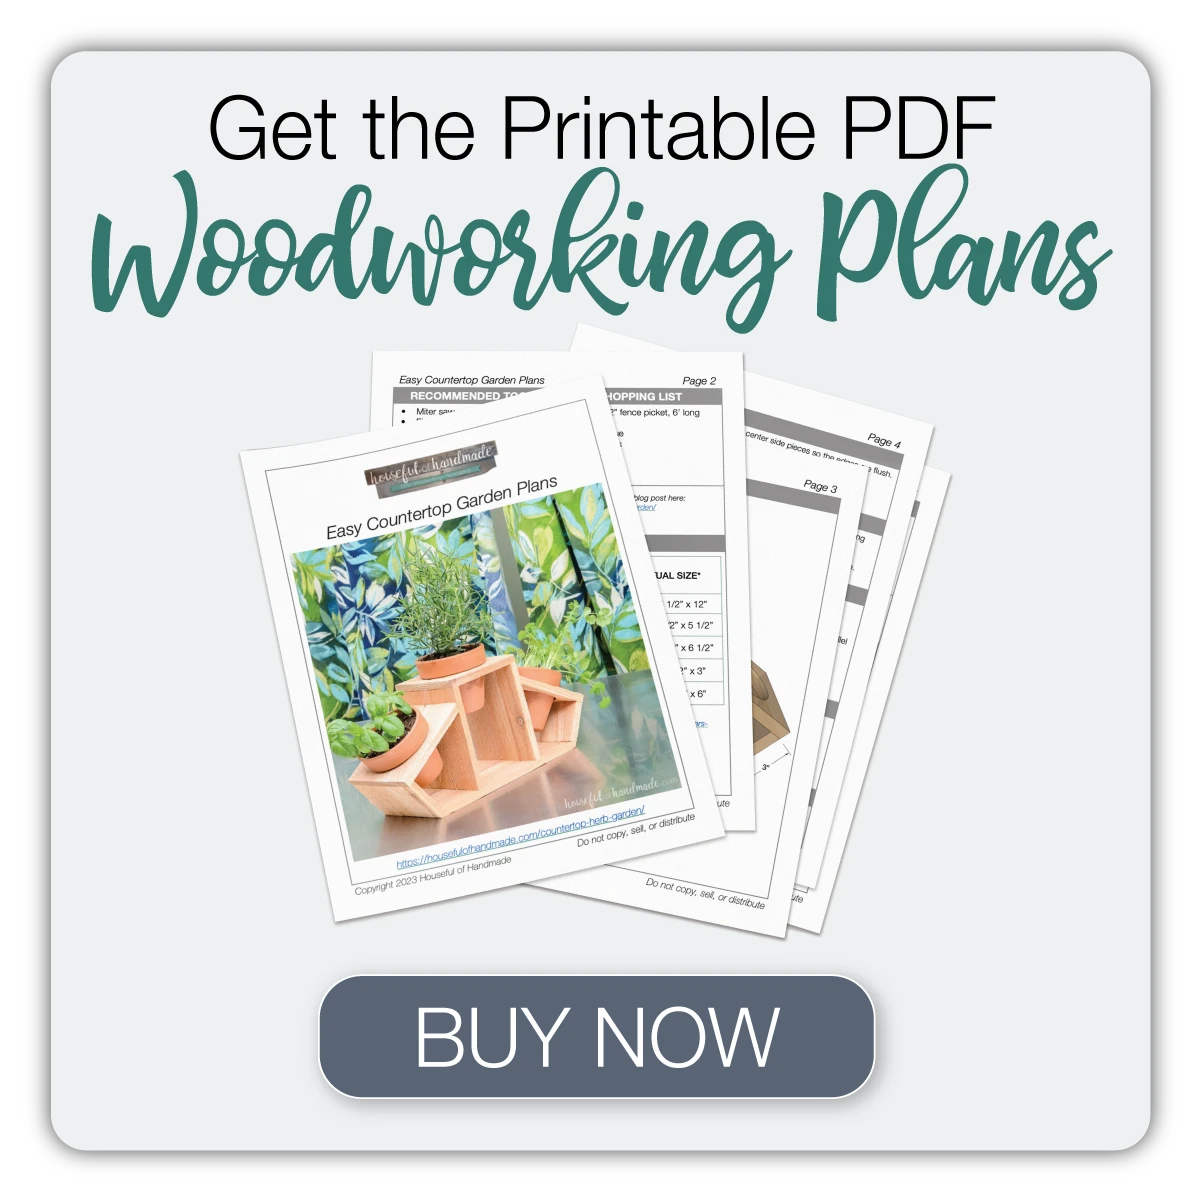 Button to buy the printable PDF plans for the simple countertop garden.